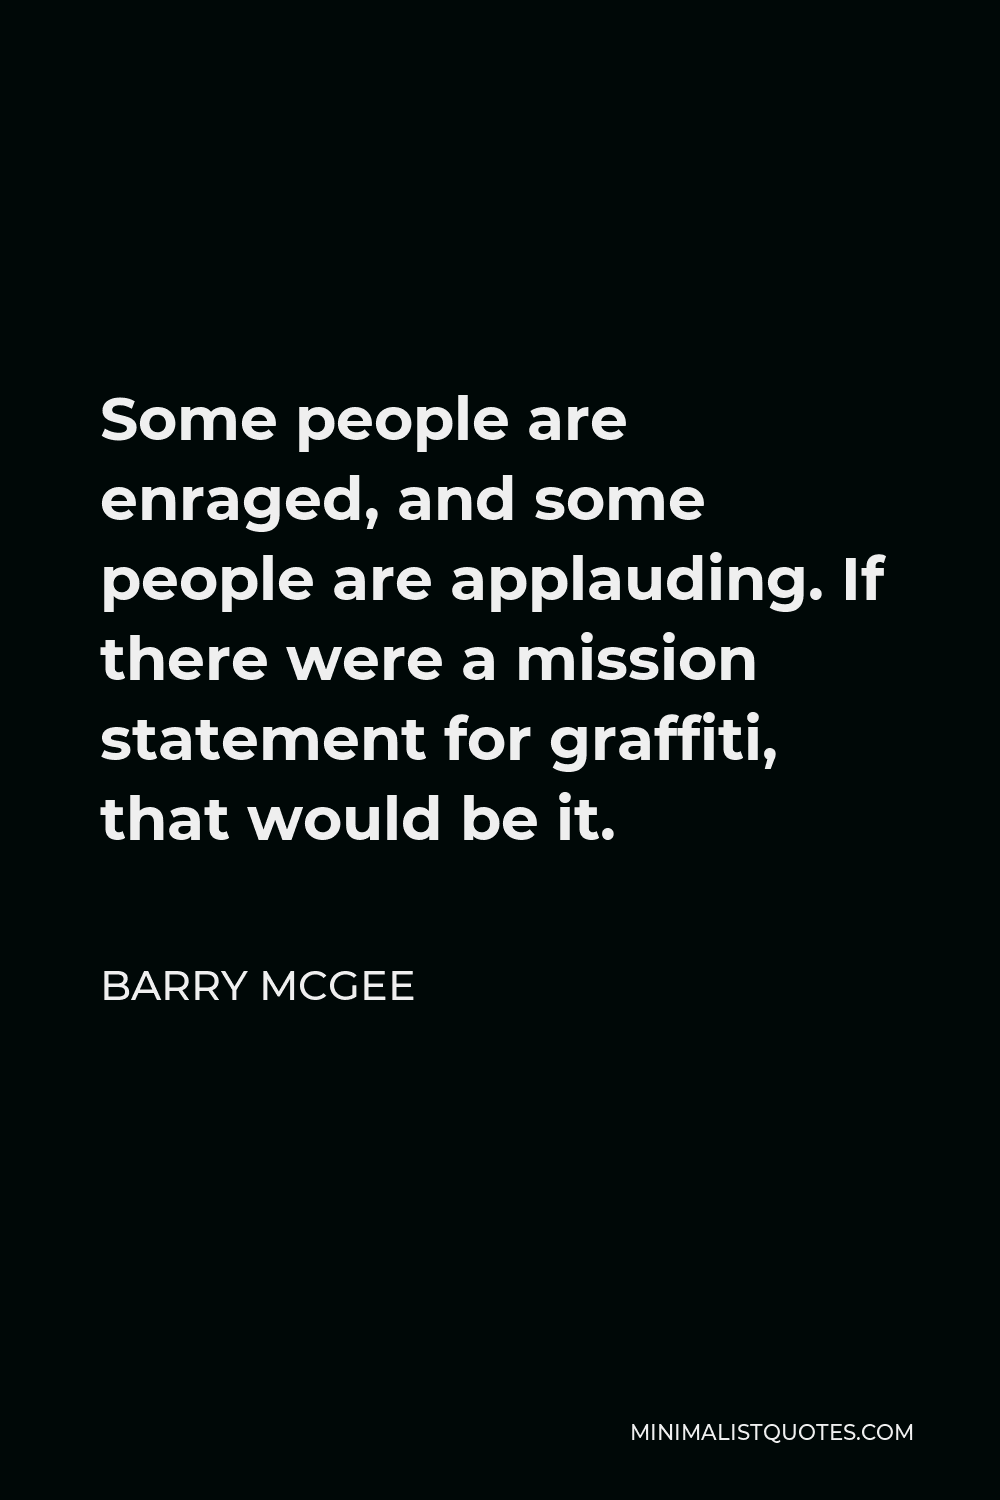 Barry McGee Quote - Some people are enraged, and some people are applauding. If there were a mission statement for graffiti, that would be it.